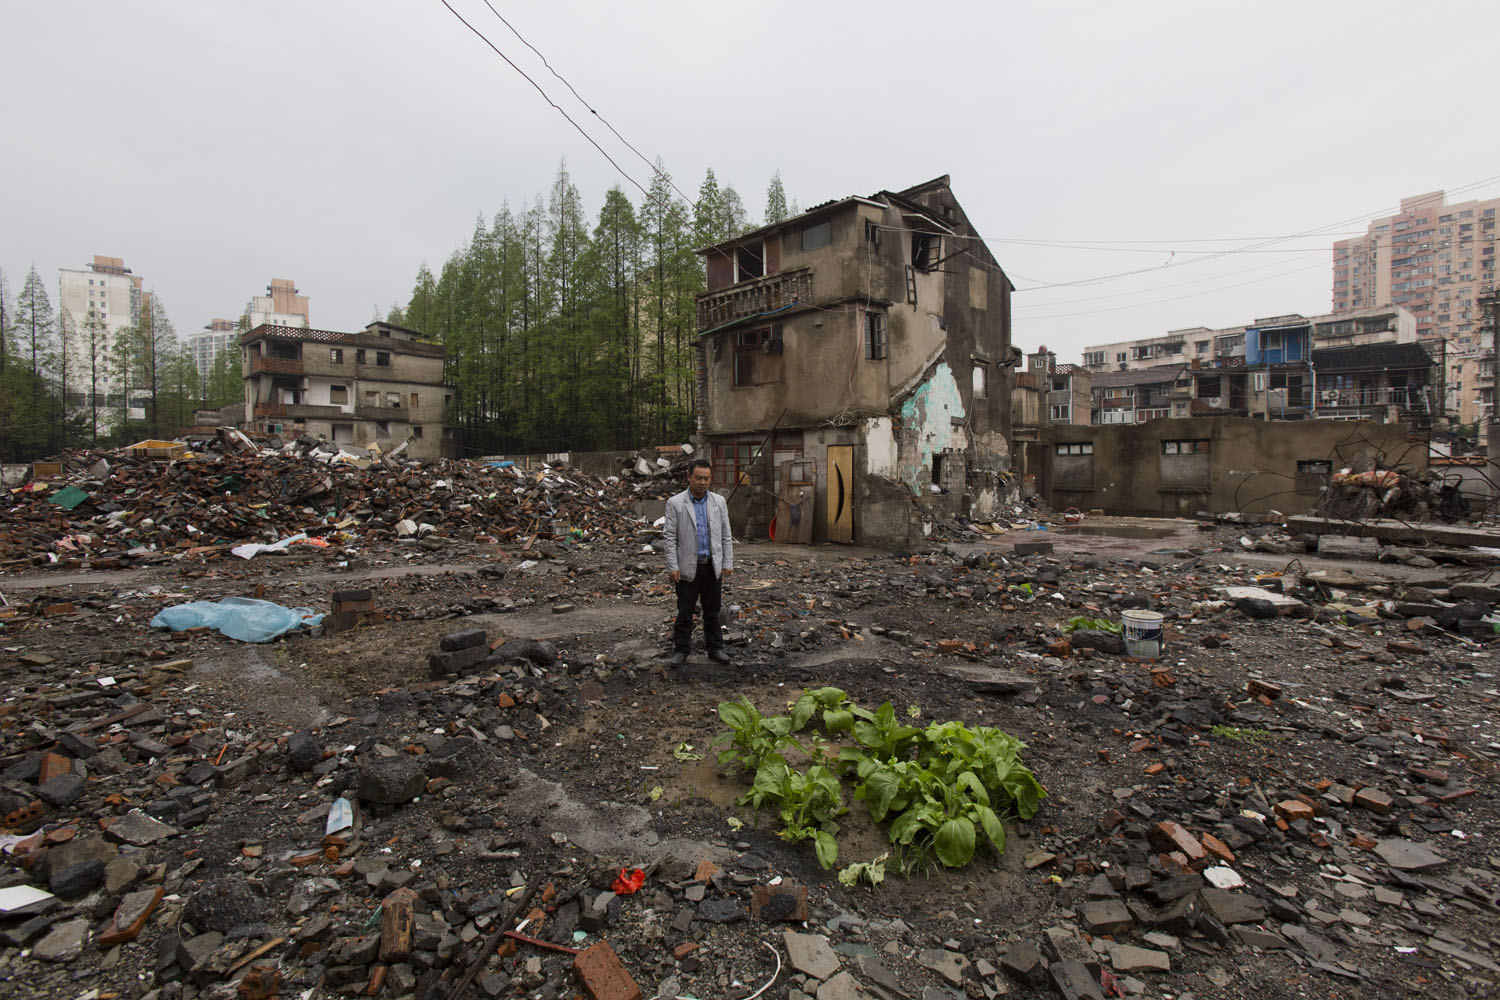 Man stares at a newly planted garden surrounded by debris and rubble. Guangfu Road. Shanghai, China. 2016.